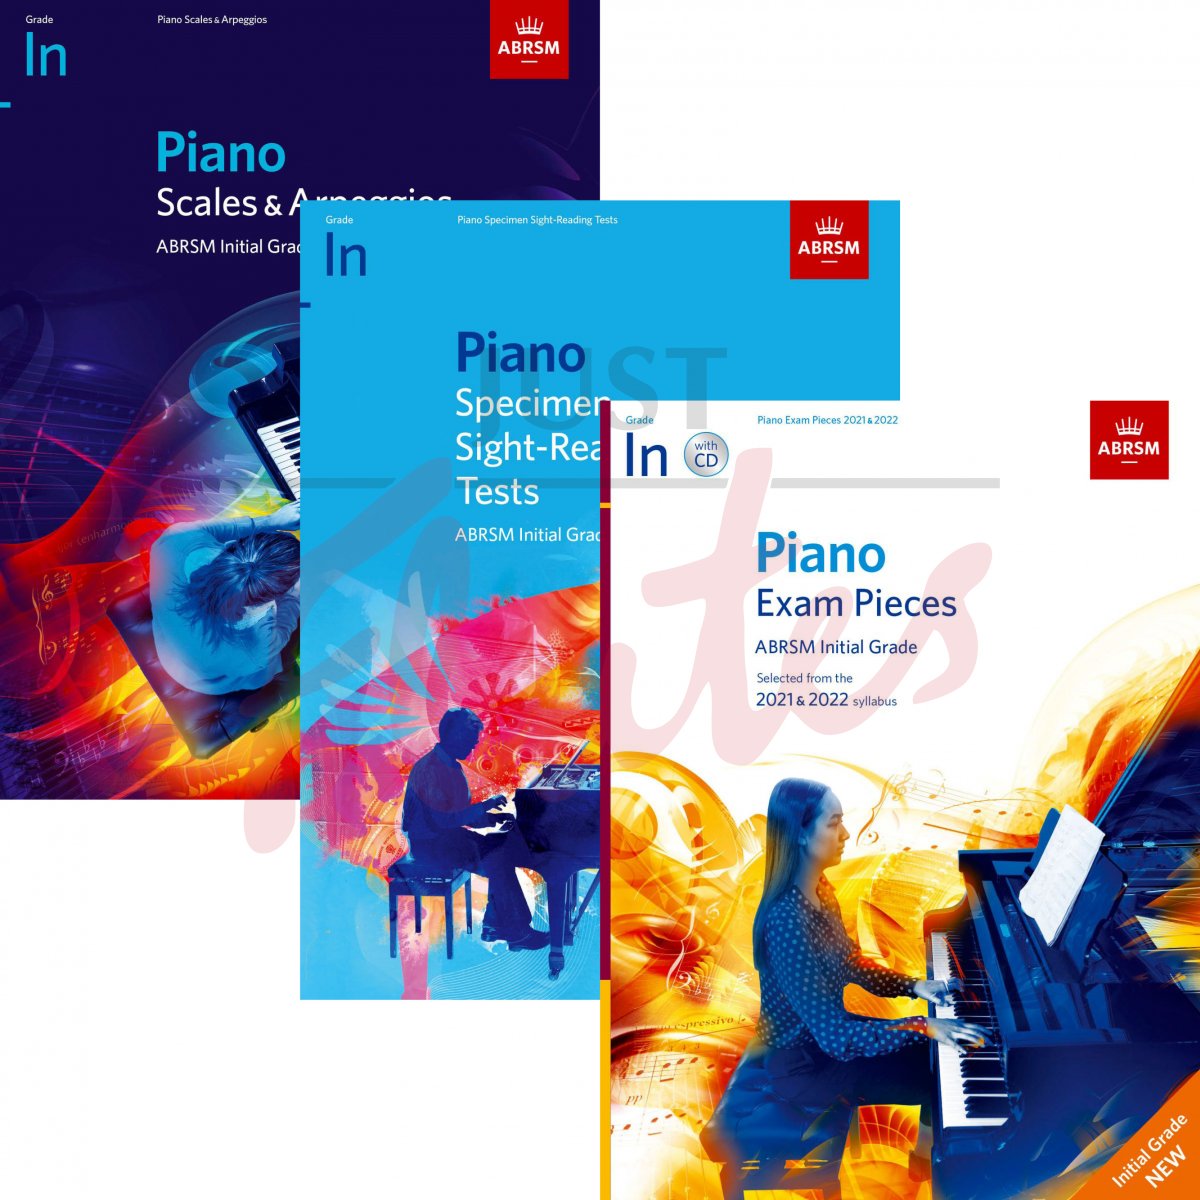 Piano Exam Bundle 2021-2022 (Pieces, Scales and Sight-Reading) Initial Level